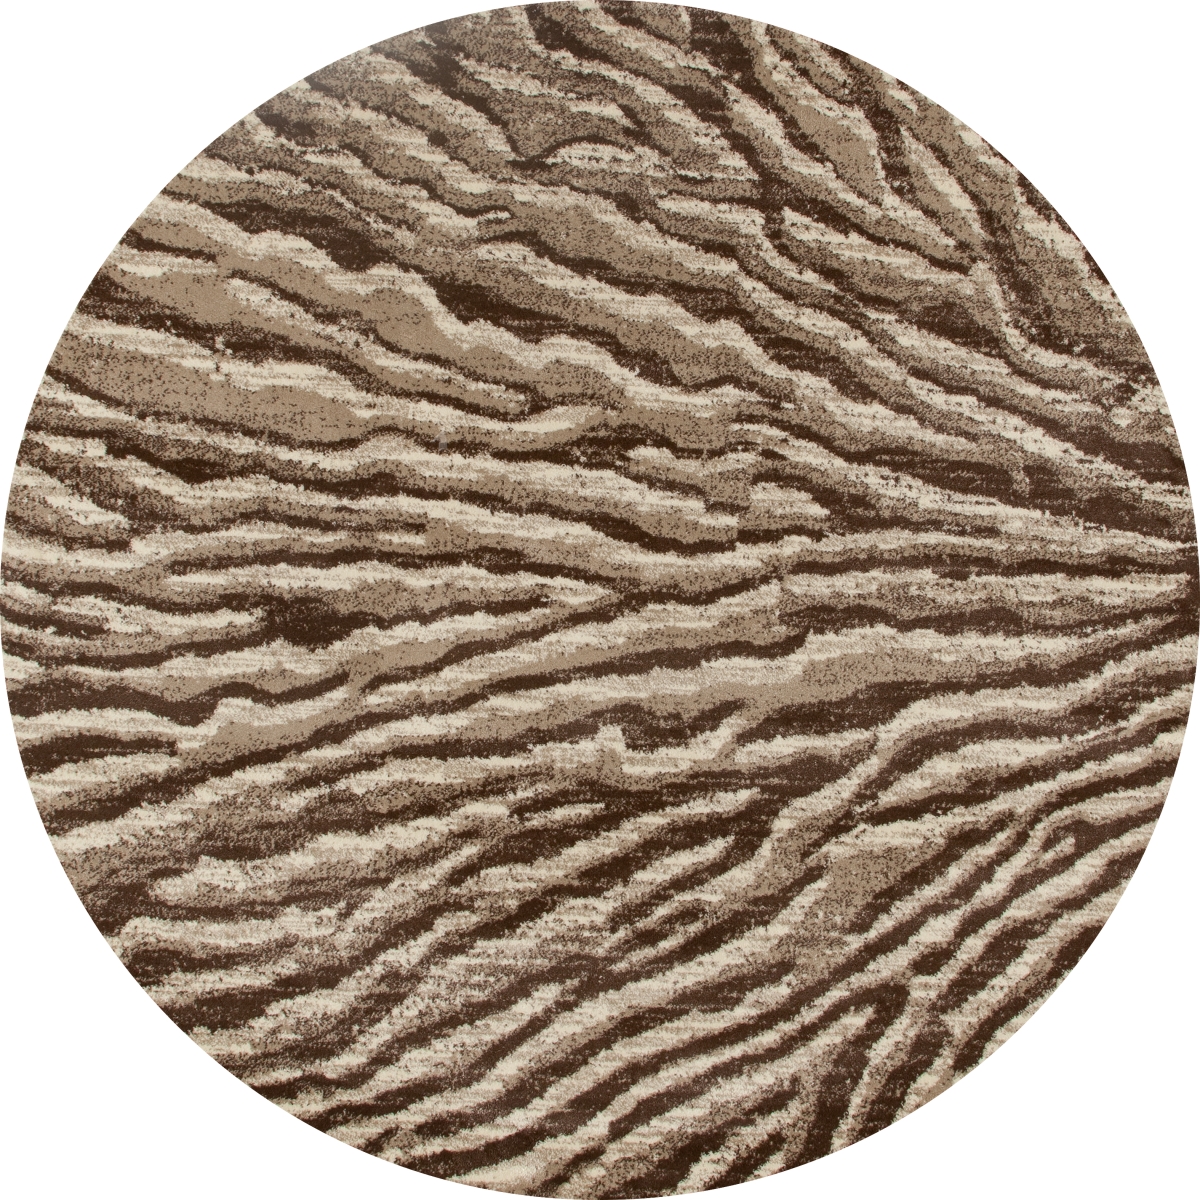 26082 8 Ft. Troy Collection Ripple Woven Round Area Rug, Beige